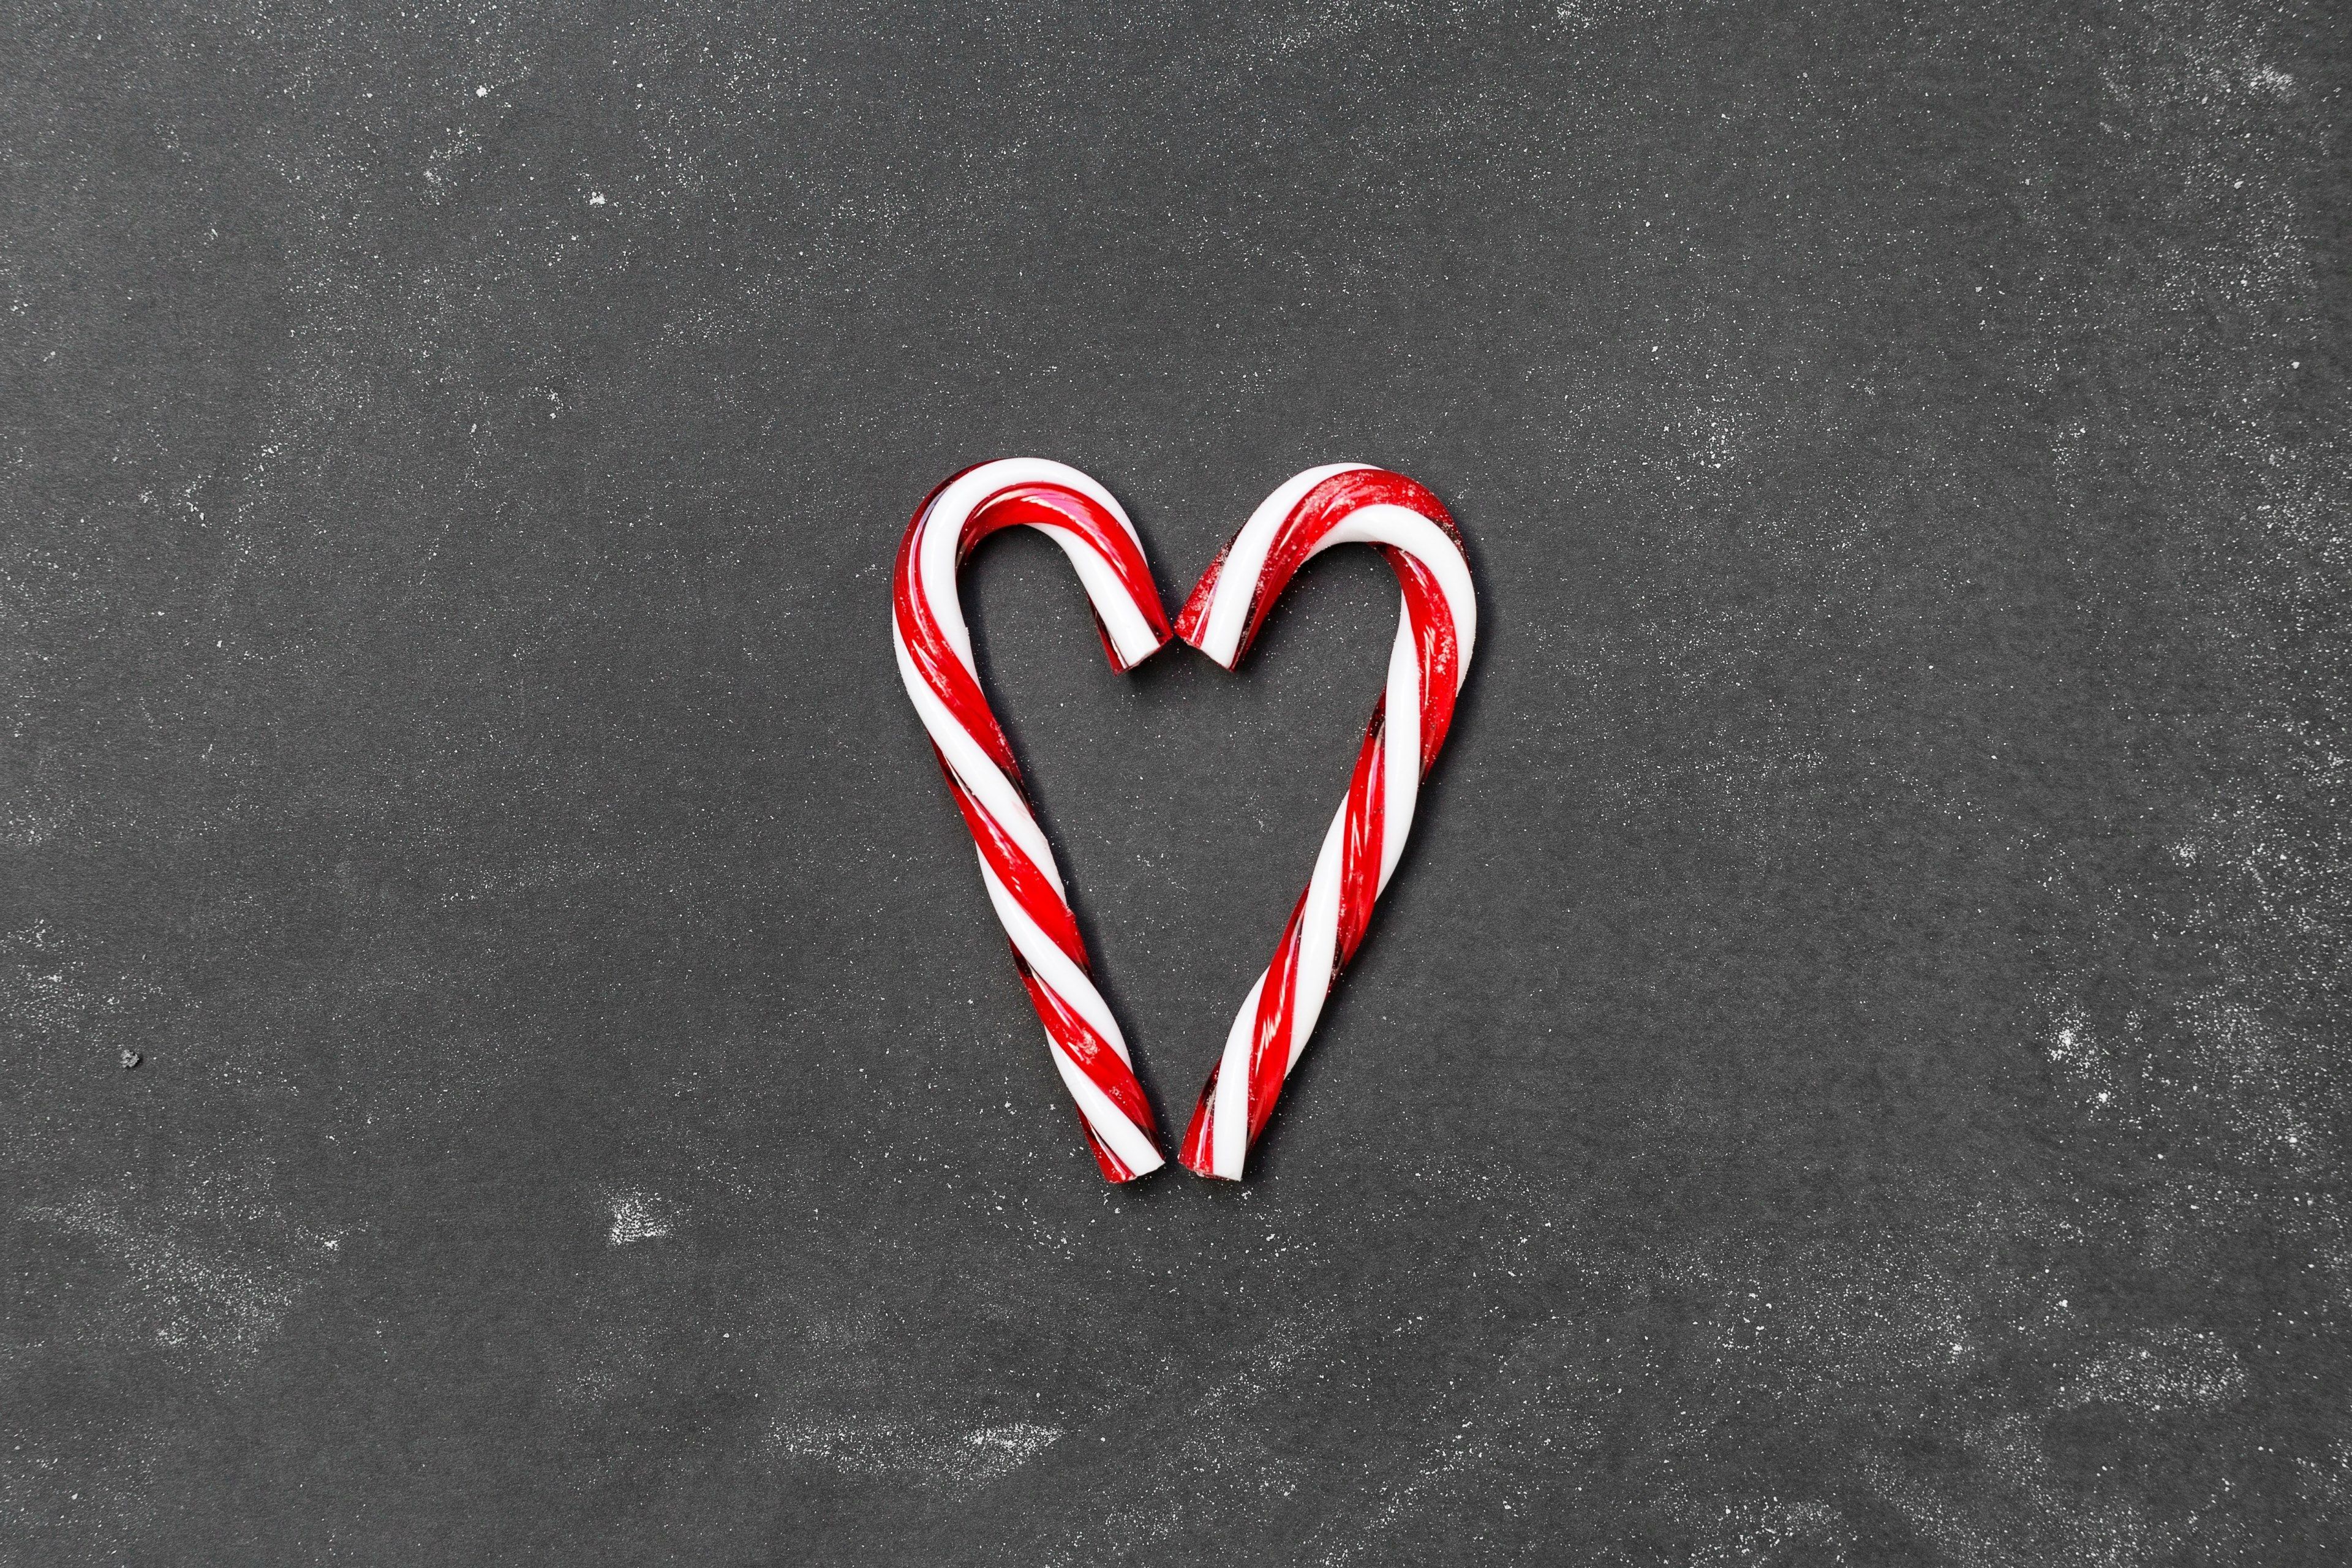 Wallpaper / heart candy cane candy and christmas HD 4k wallpaper free download